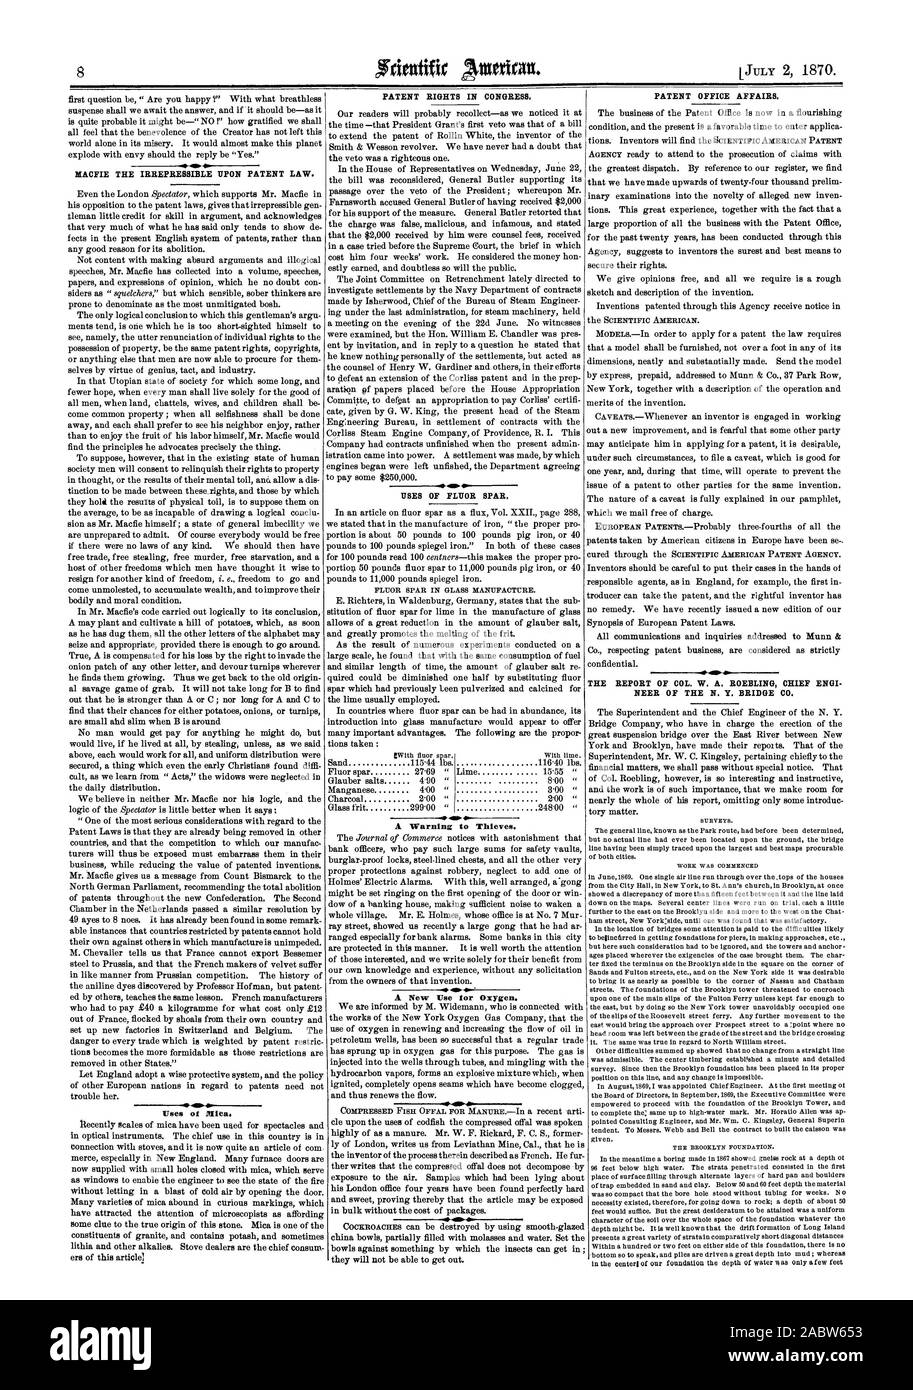 MACFIE THE IRREPRESSIBLE UPON PATENT LAW. PATENT RIGHTS IN CONGRESS. 44 USES OF FLUOR SPAR. FLUOR SPAR IN GLASS MANUFACTURE. 4 PATENT OFFICE AFFAIRS. THE REPORT OF COL. W. A. ROEBLING CHIEF ENGI NEER OF THE N. Y. BRIDGE CO., scientific american, 1870-07-02 Stock Photo